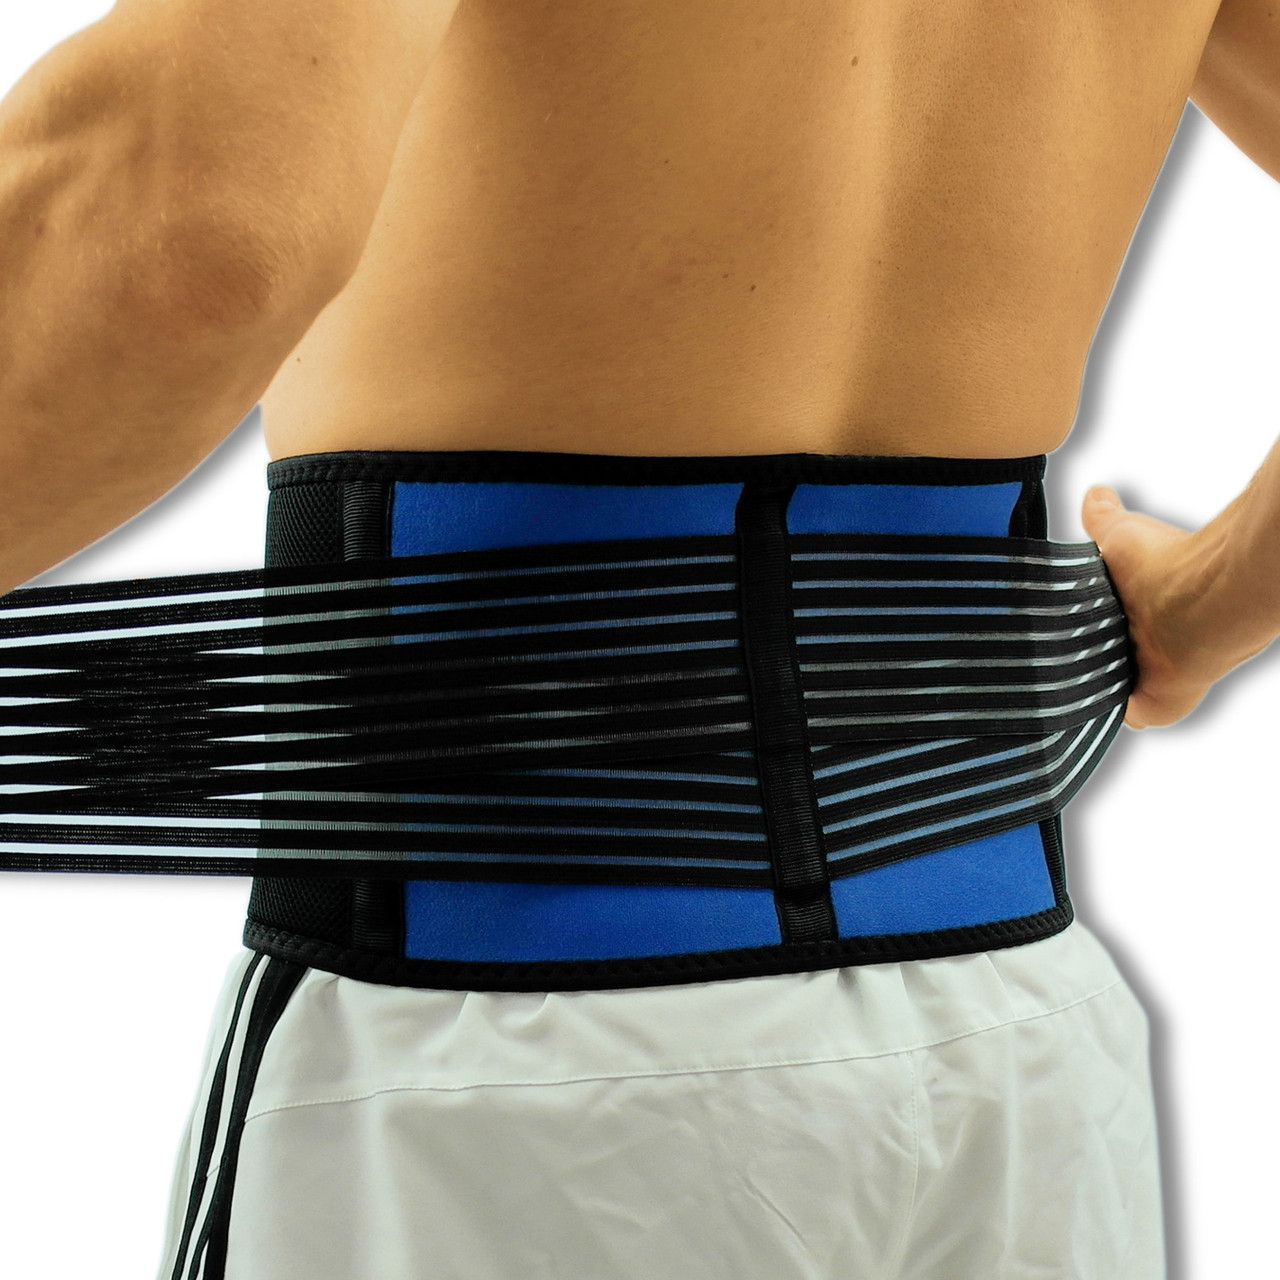 Abdominal support belt with adjustable all-round elastic